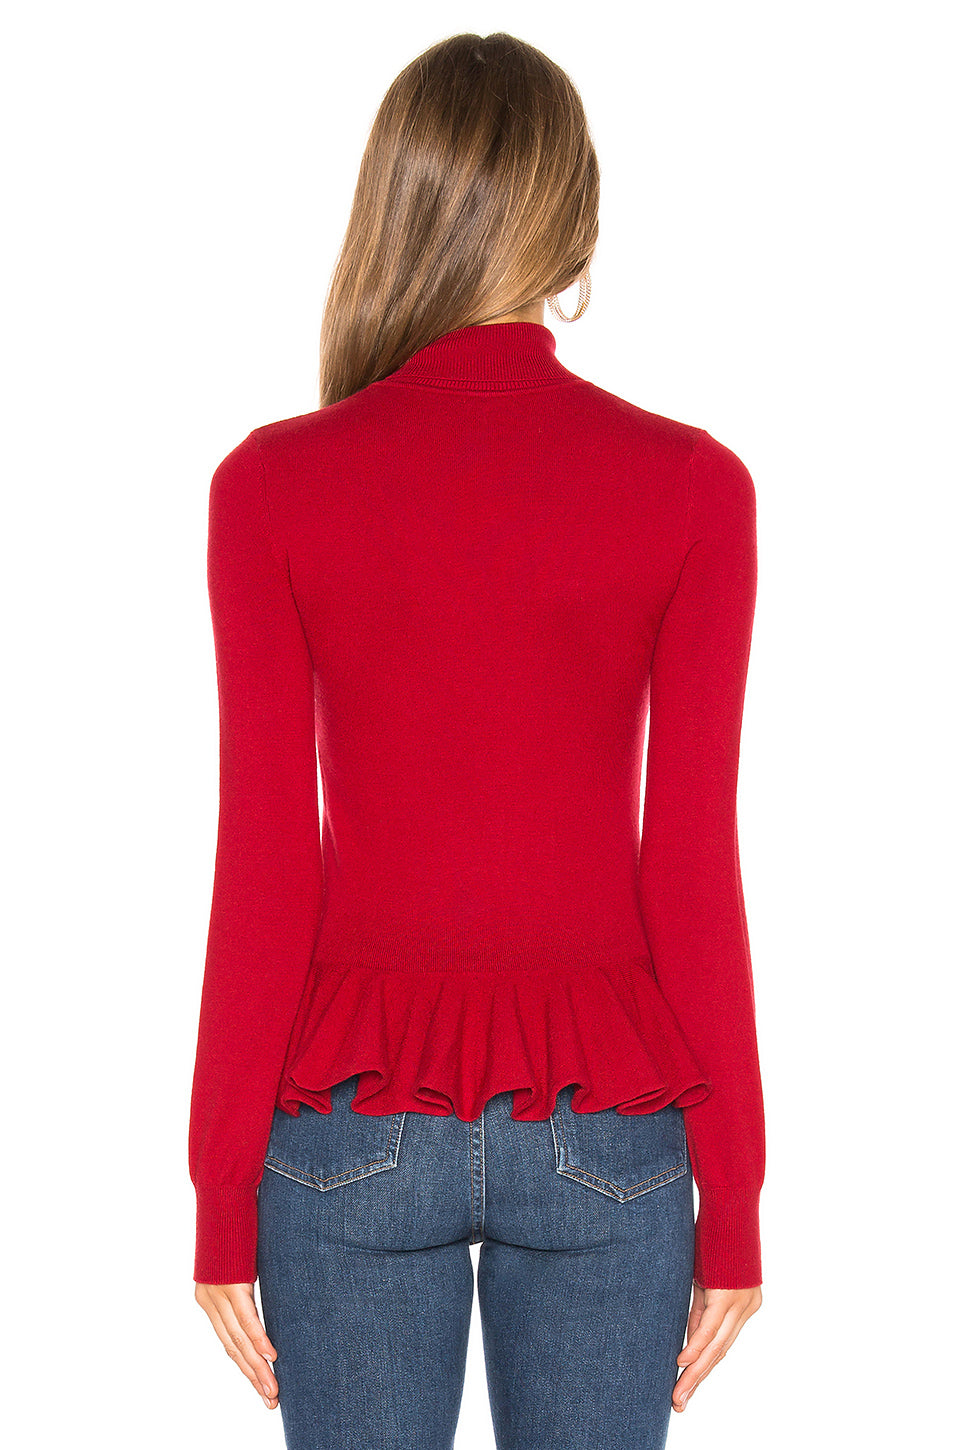 Agera Sweater in RED